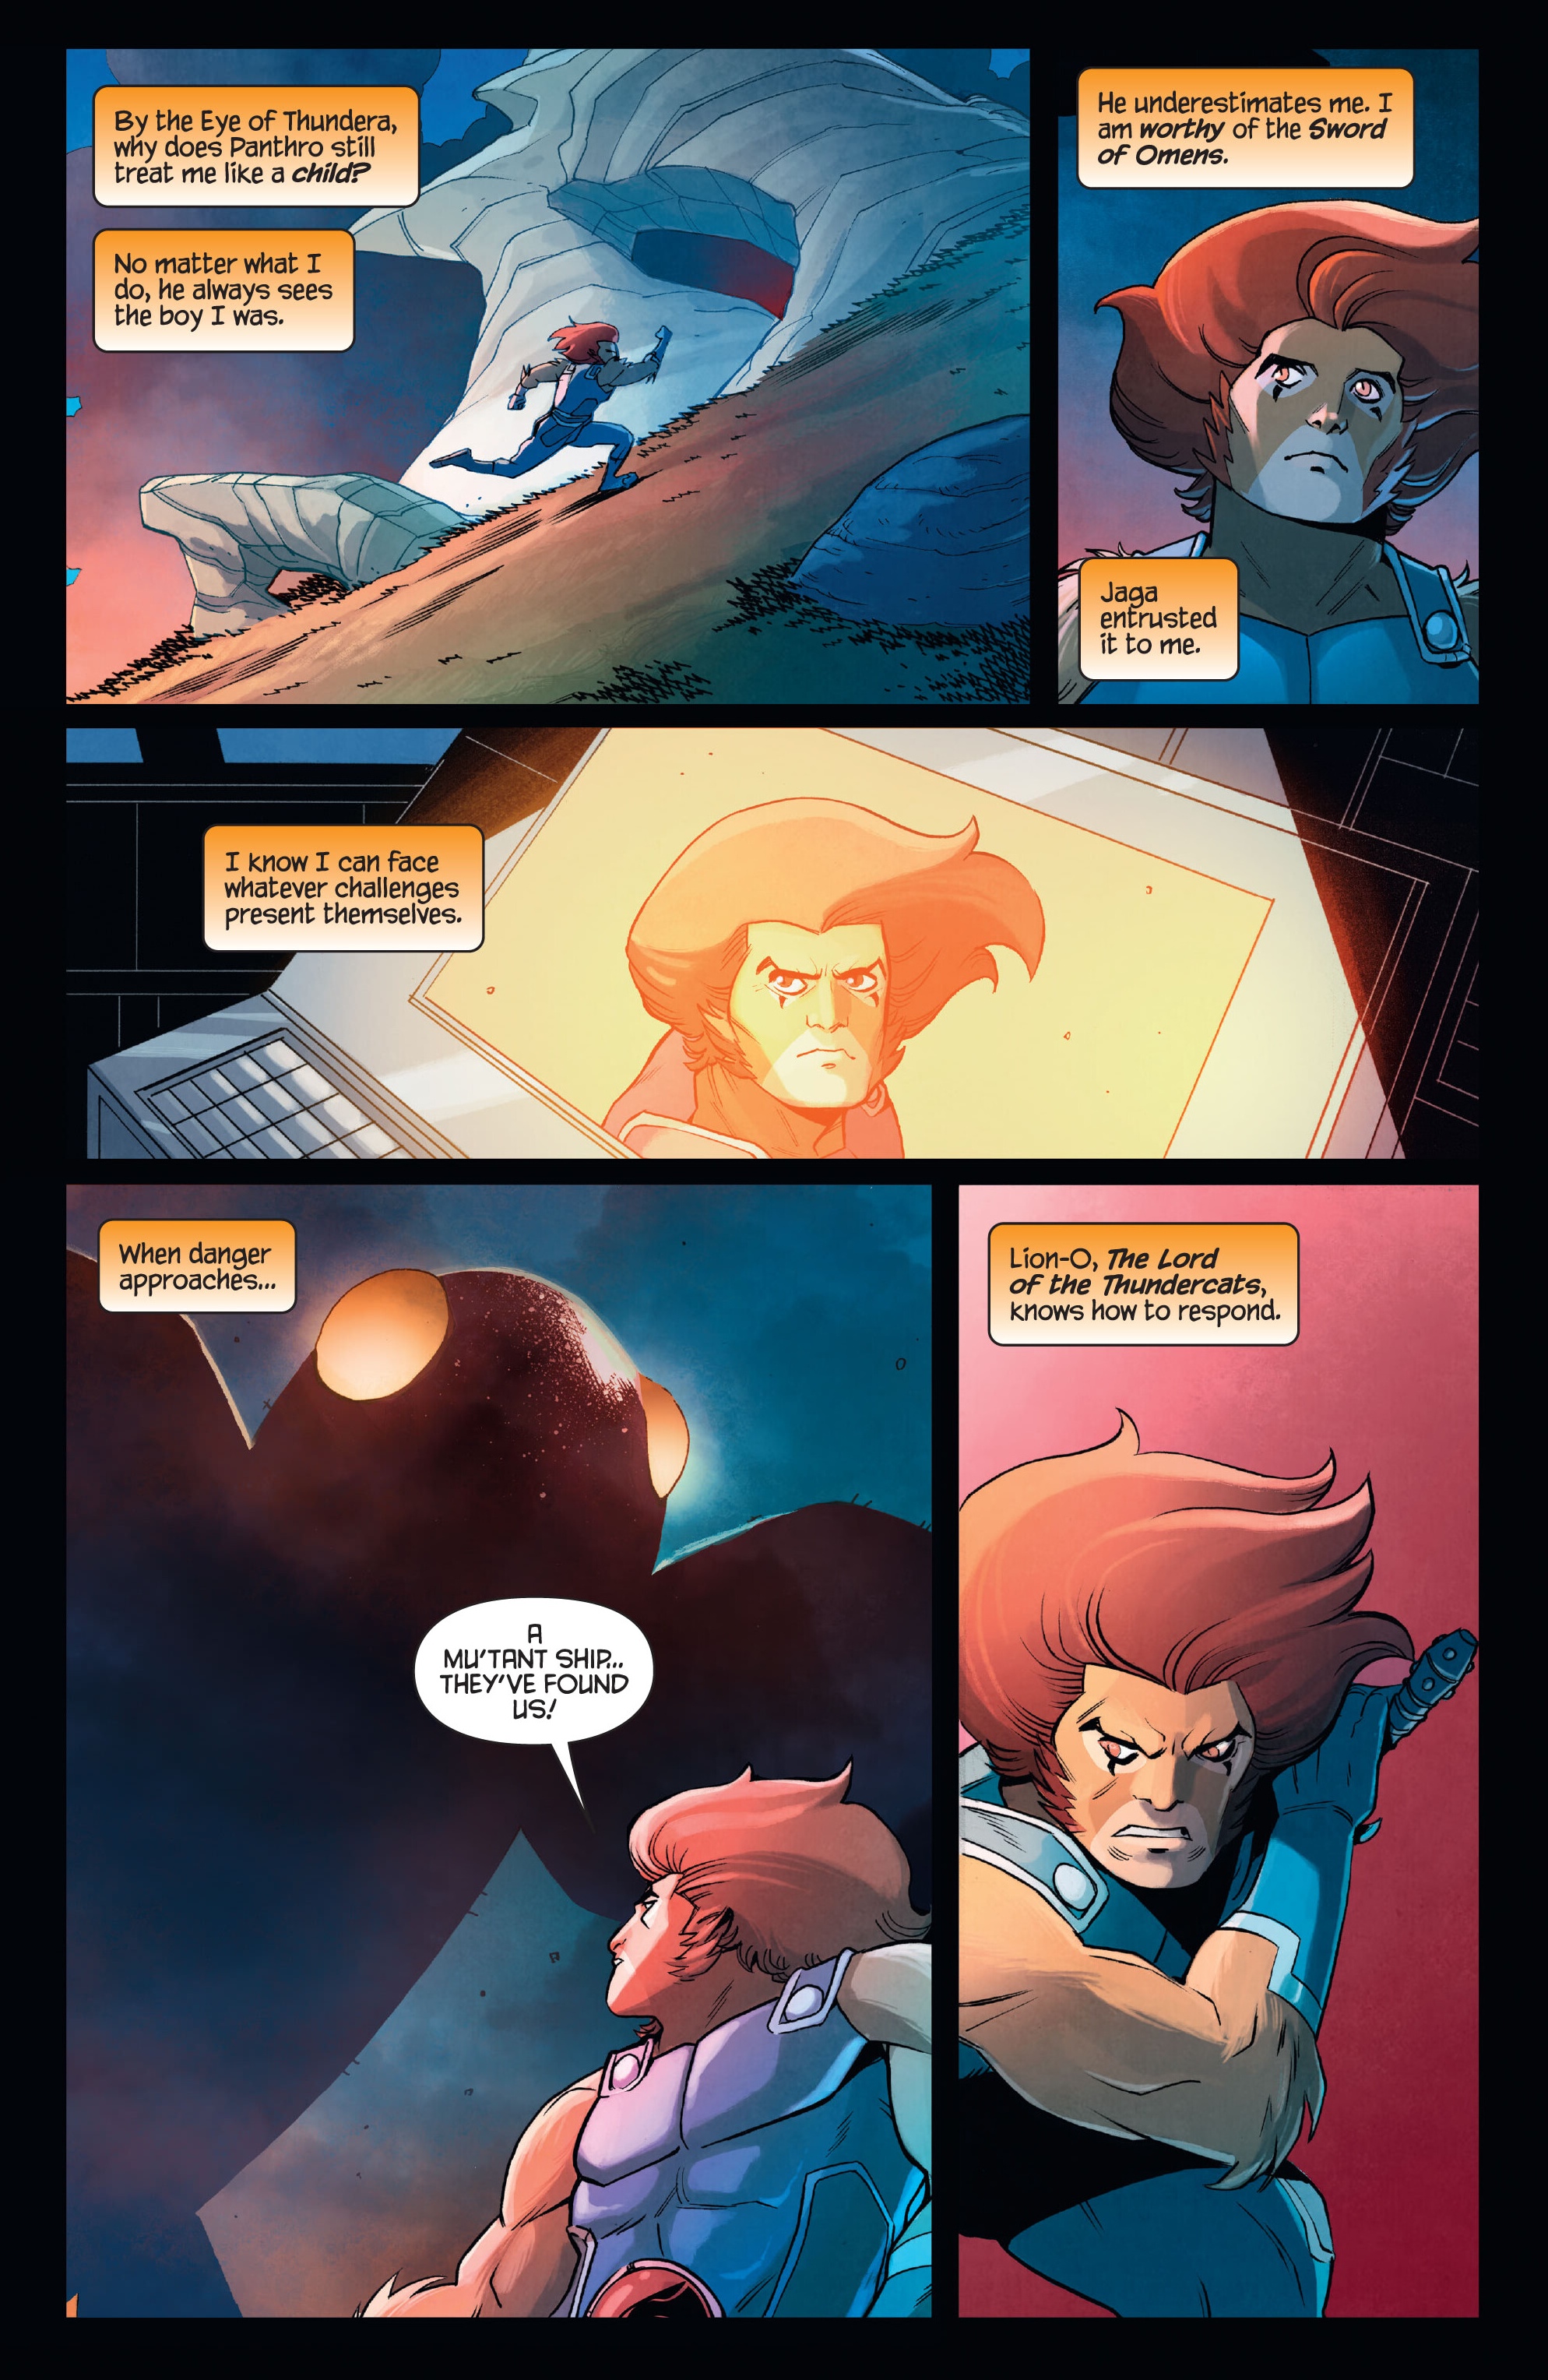 Thundercats (2024) Chapter 1 Page 18